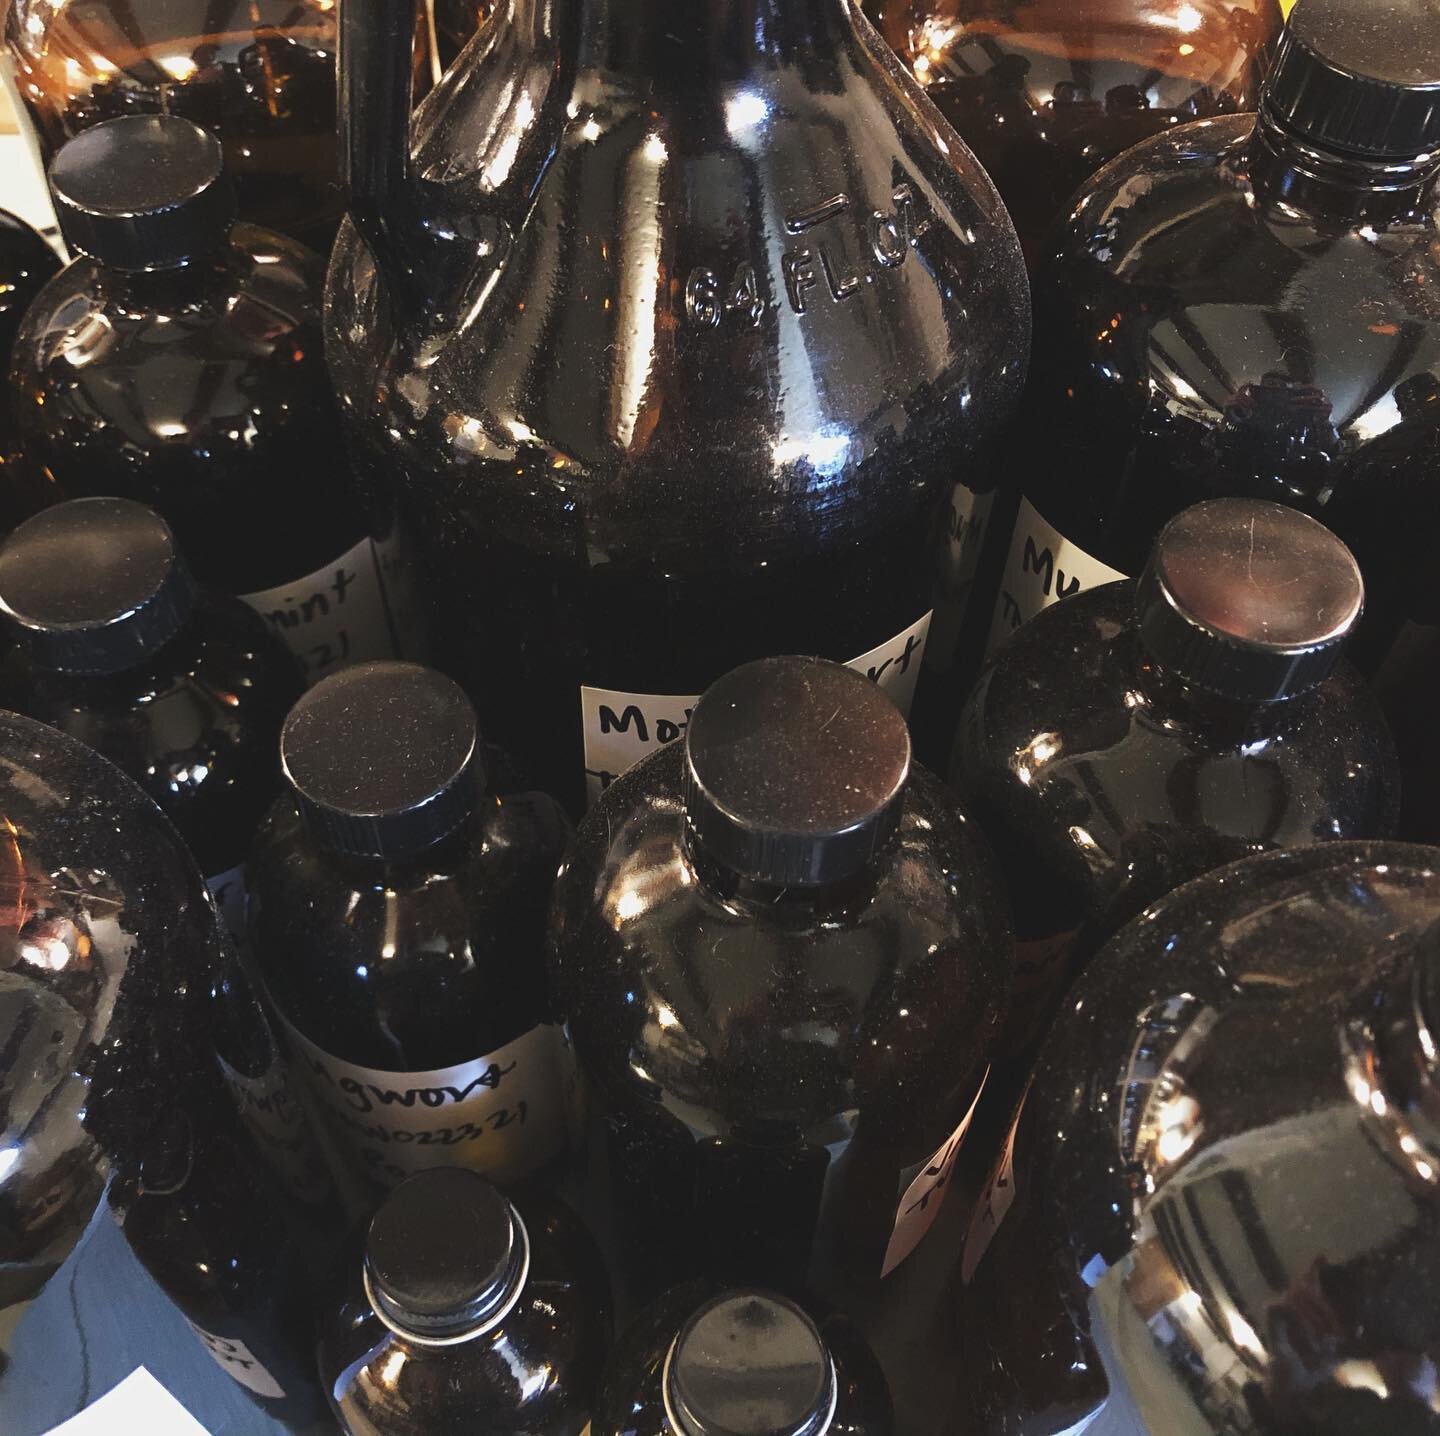 Sea of tinctures sums up my time these days. Pressing, bottling, inventorying, getting ready to &ldquo;open&rdquo; - providing medicine for the people (your clients) so you (the herbalist) can focus on all that it takes to be a caring, compassionate 